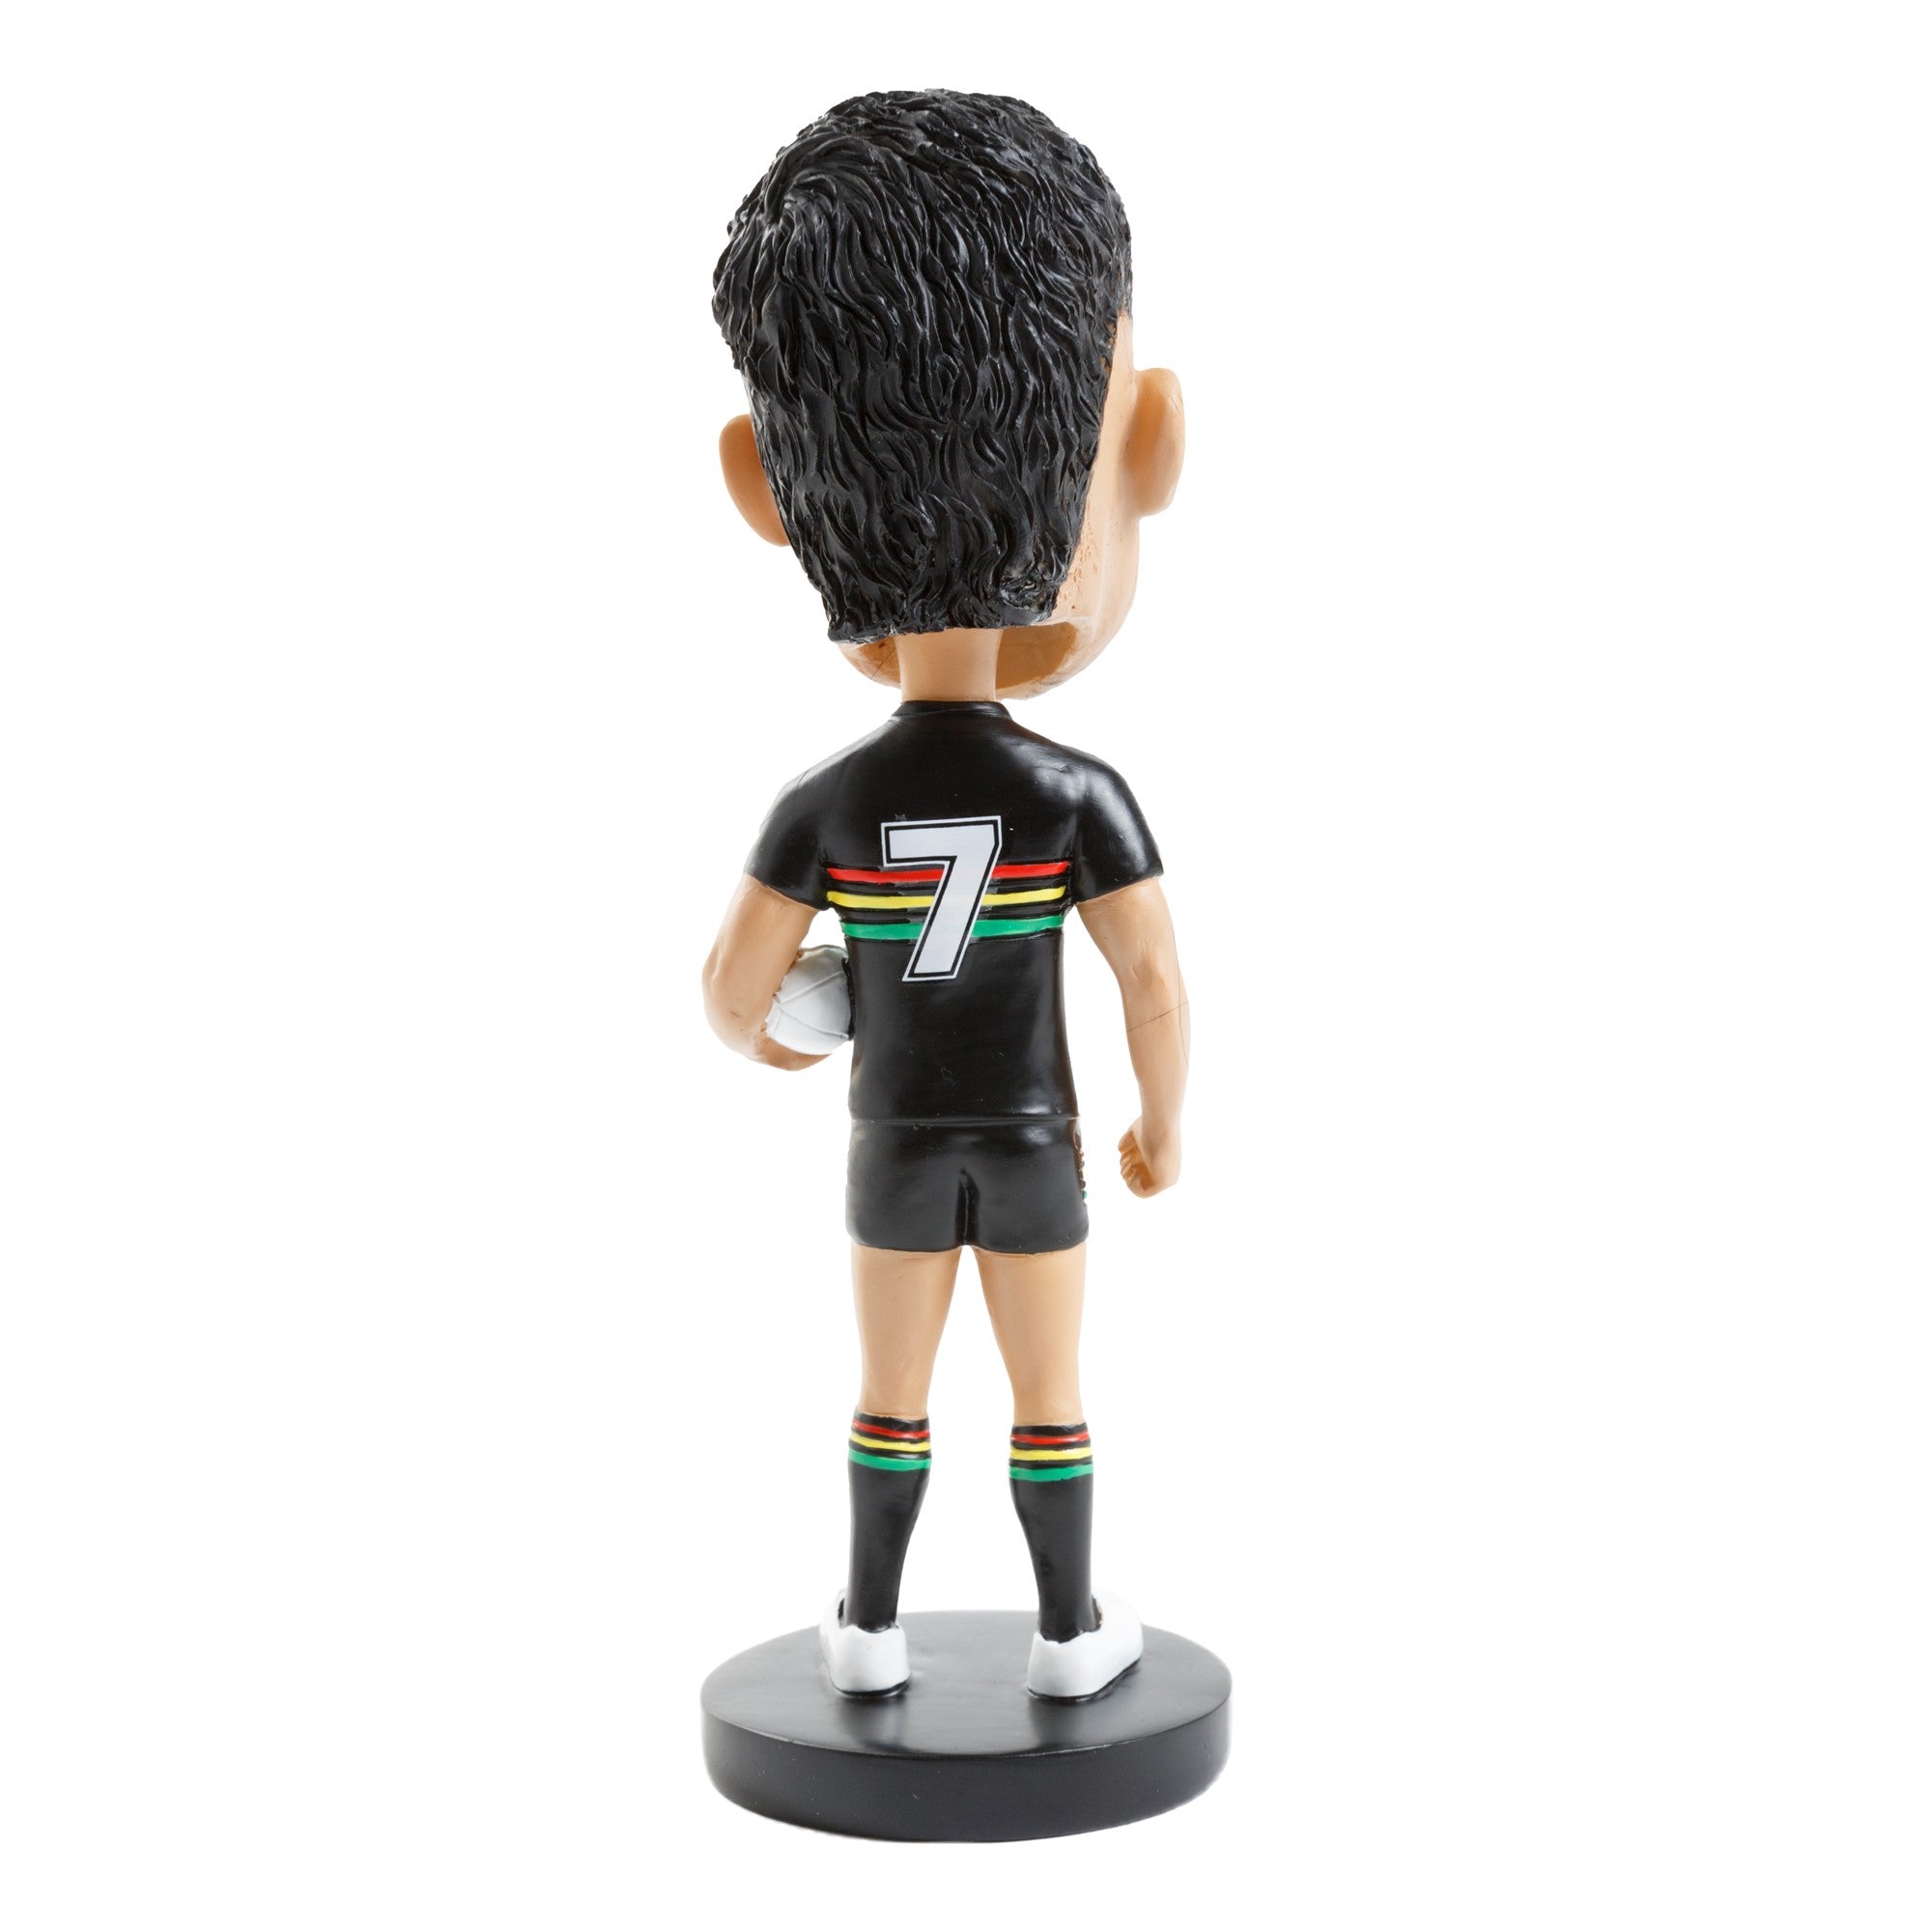 NRL Penrith Panthers NATHAN CLEARY Bobblehead Collectable 18cm tall Statue Gift